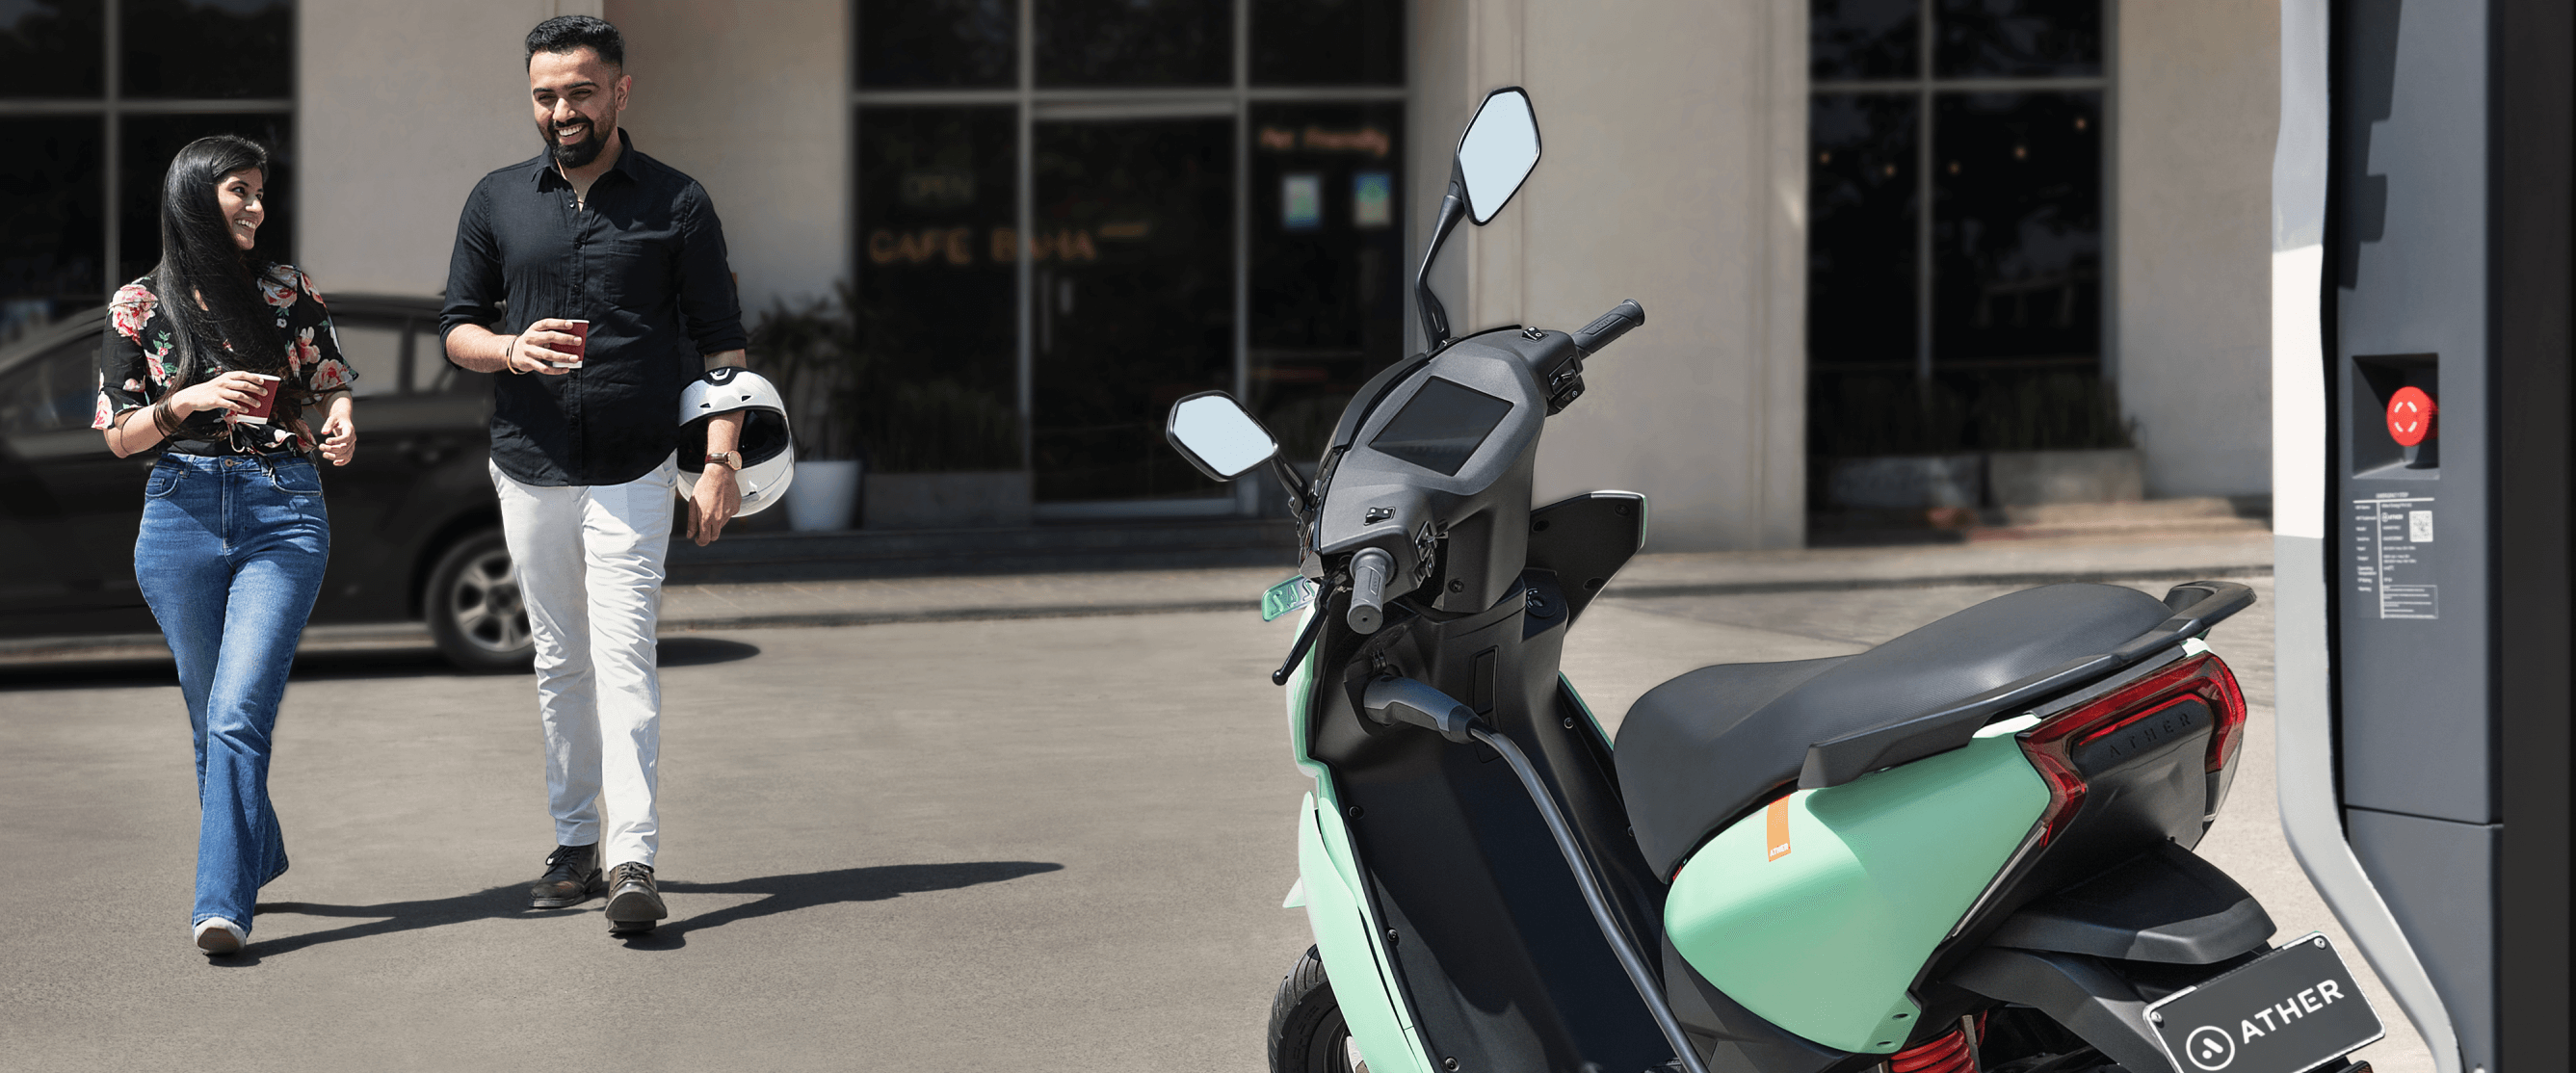 Ather Grid, Electric Scooter Charging Station